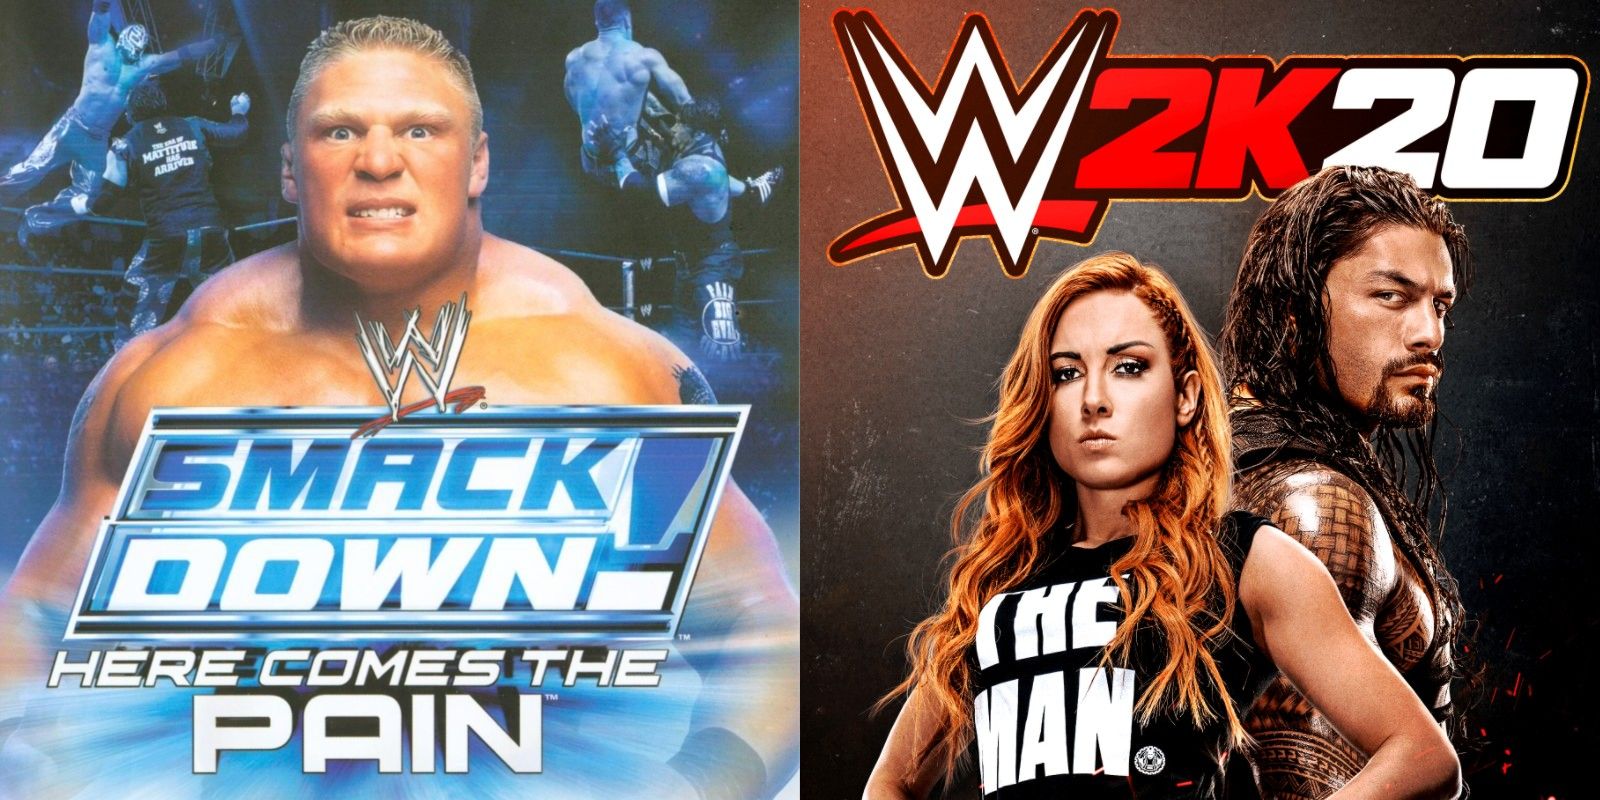 Over the last few years, WWE games have failed to achieve the glory of their past titles.